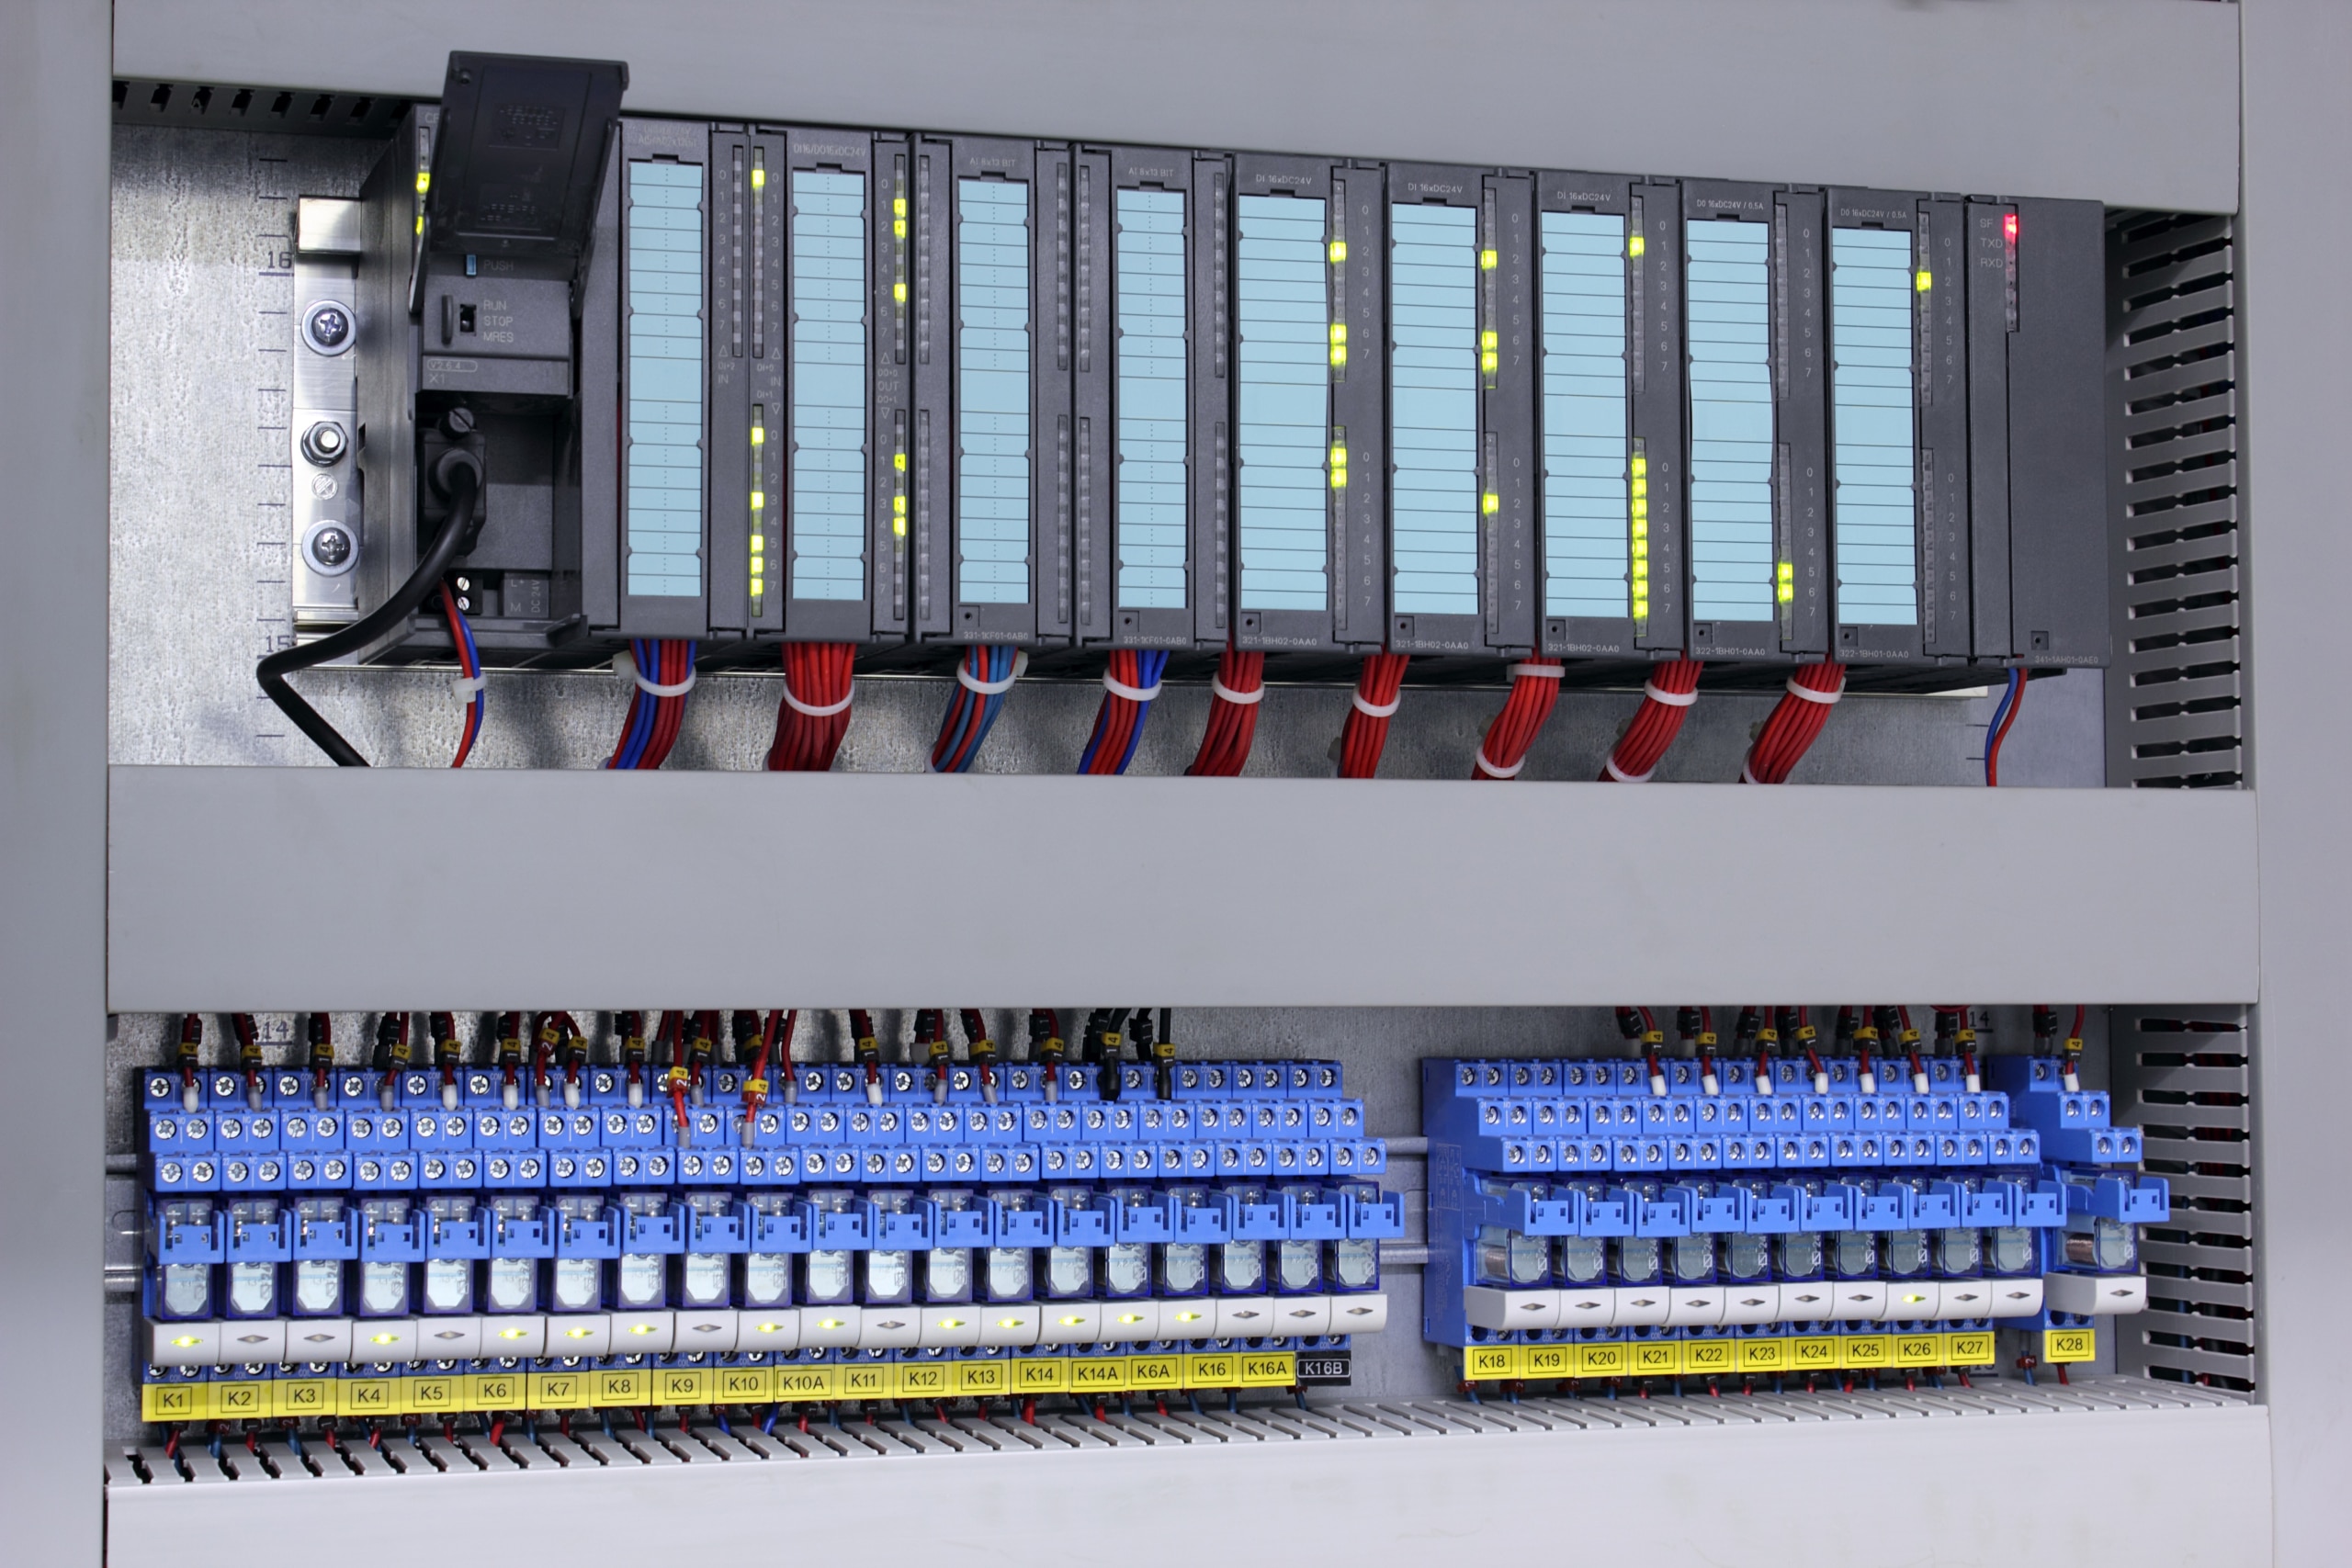 Programmable Logic Controller Market: A Growing Industry with Promising Opportunities